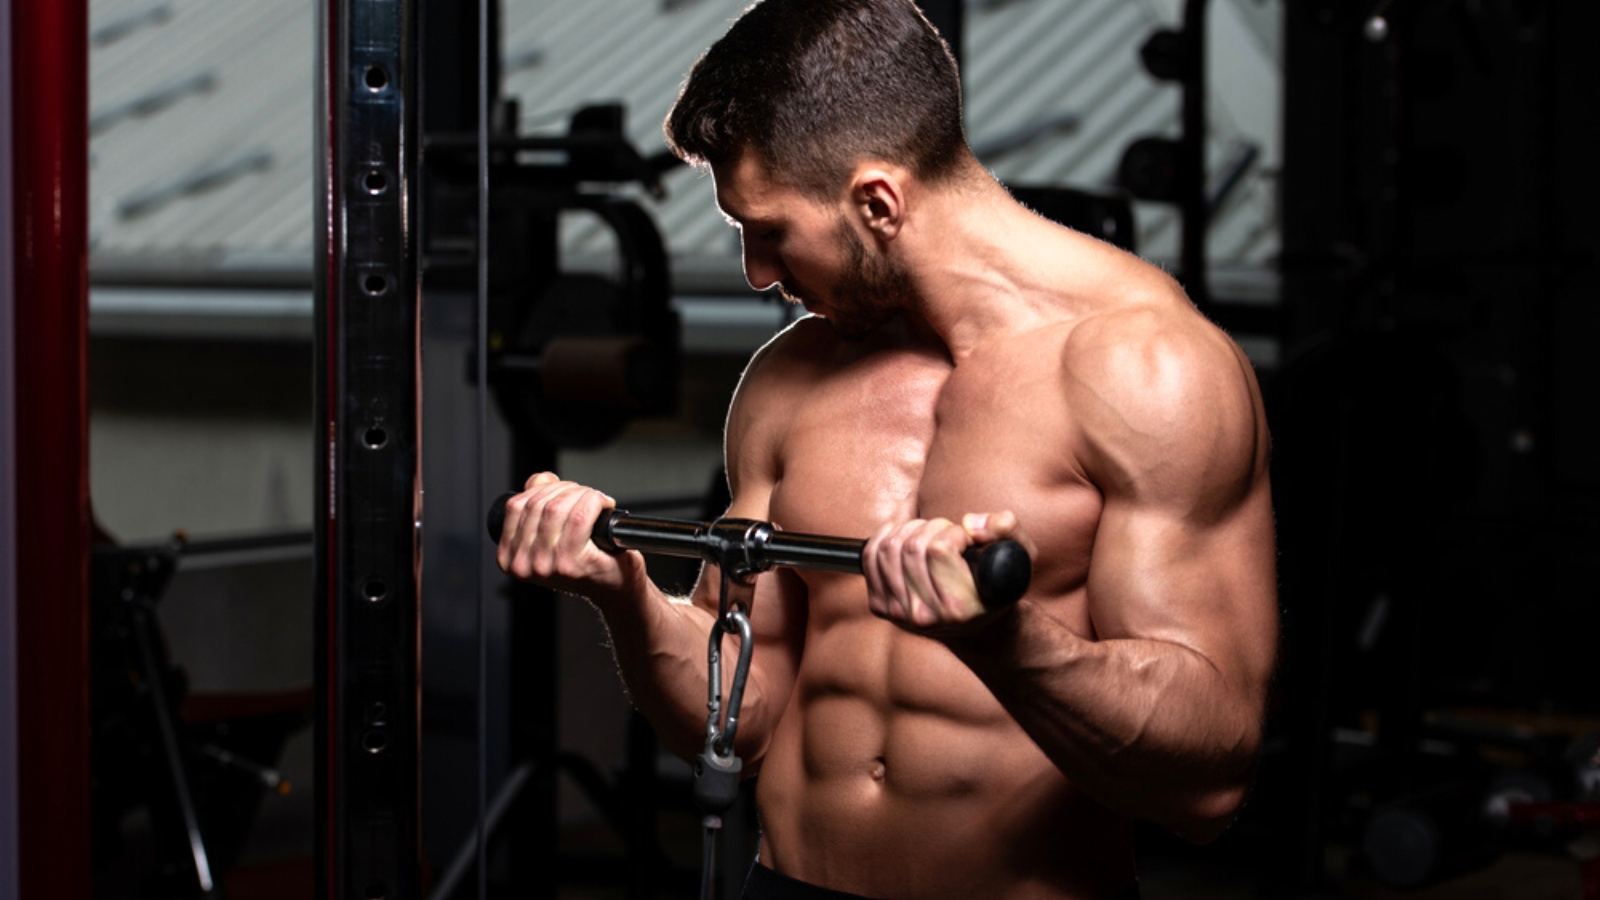 How to Do the Cable Biceps Curl for the Best Arm Pump You've Ever Had